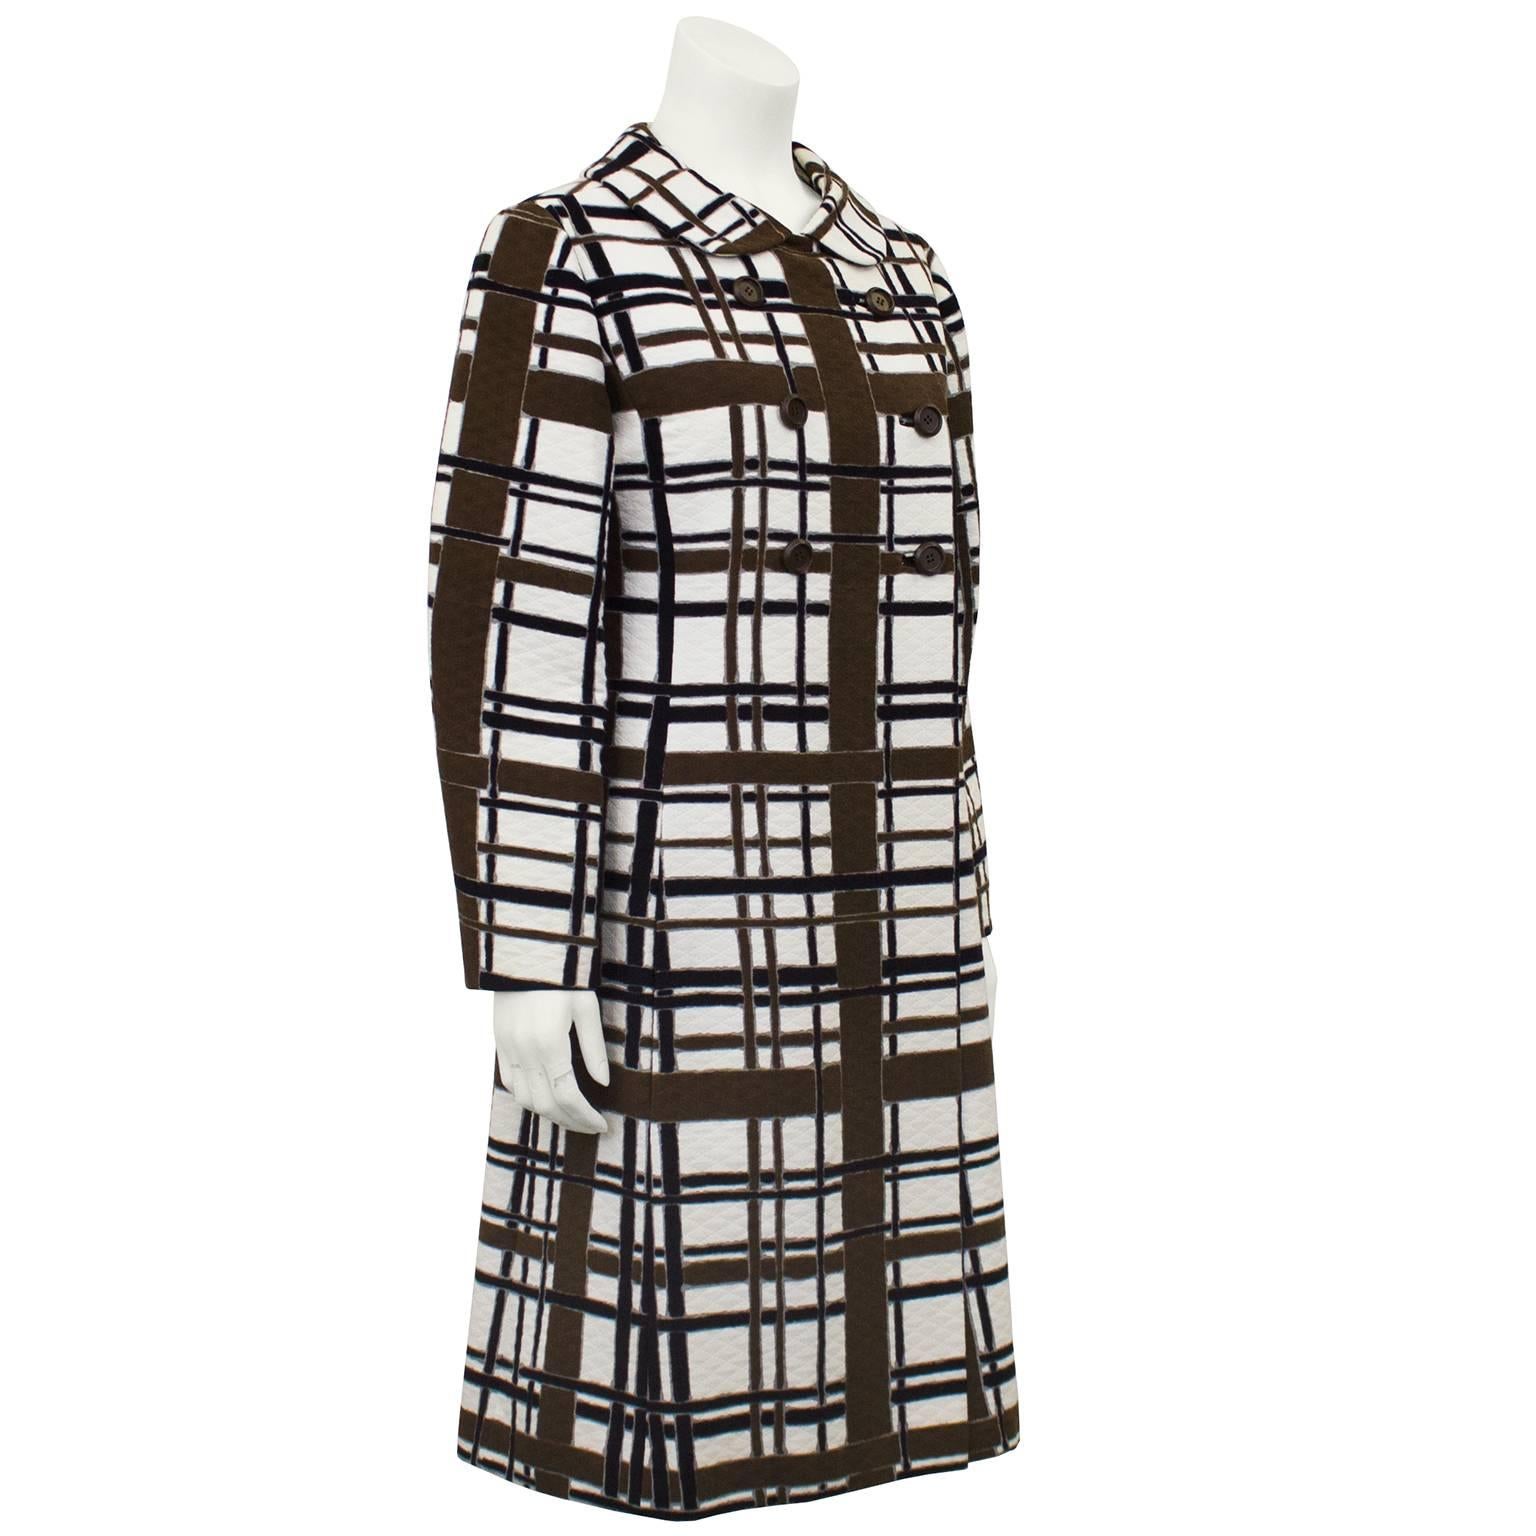 1960s Mod style windowpane print coat. Cream cotton like fabric with quilting throughout with a brown, black and grey windowpane print. Large Peter Pan collar, double breasted with round brown plastic buttons and off white lining. Excellent vintage